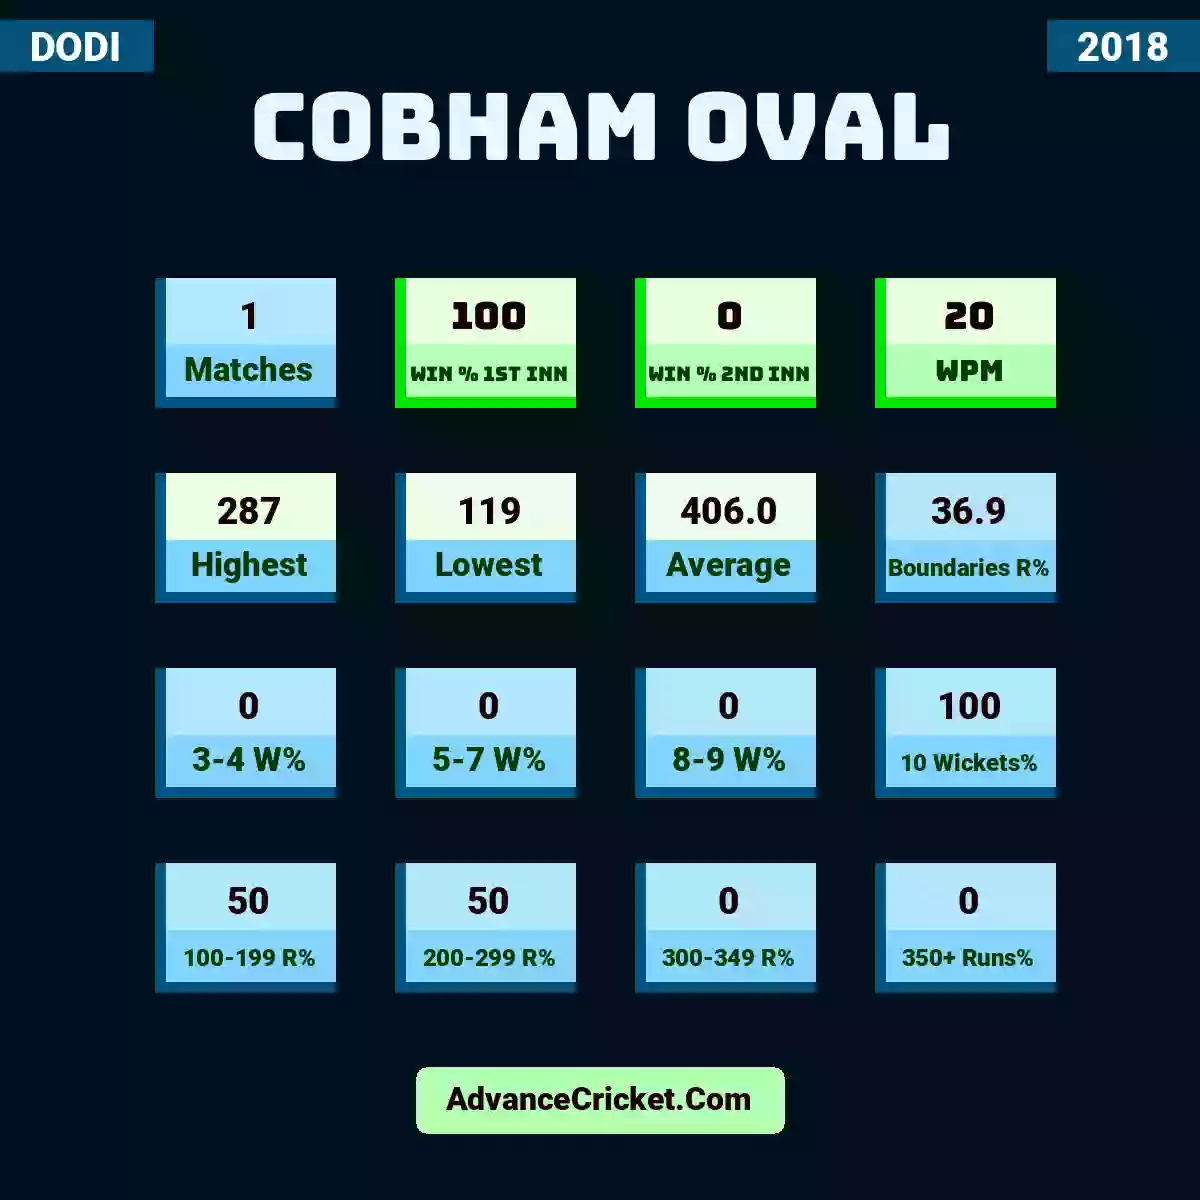 Image showing Cobham Oval with Matches: 1, Win % 1st Inn: 100, Win % 2nd Inn: 0, WPM: 20, Highest: 287, Lowest: 119, Average: 406.0, Boundaries R%: 36.9, 3-4 W%: 0, 5-7 W%: 0, 8-9 W%: 0, 10 Wickets%: 100, 100-199 R%: 50, 200-299 R%: 50, 300-349 R%: 0, 350+ Runs%: 0.